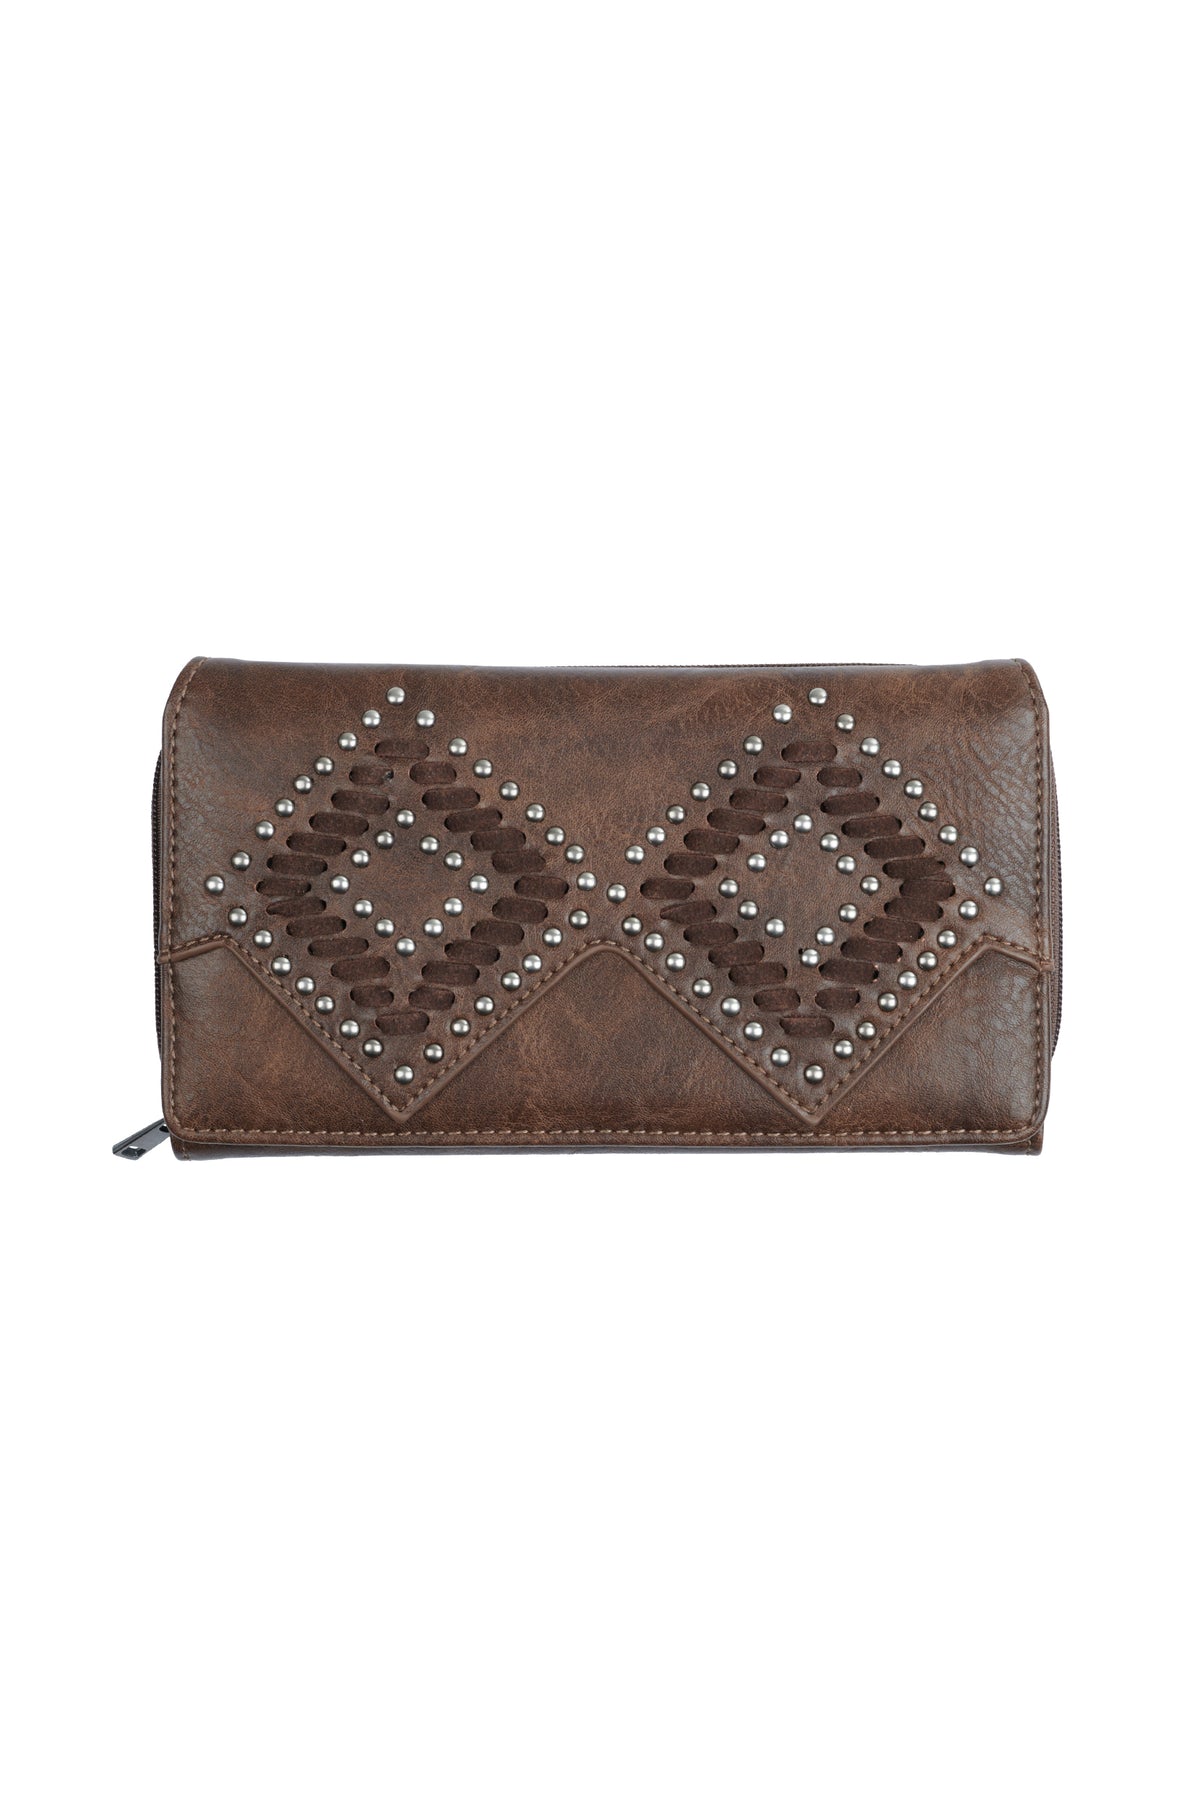 Pure Western Paige Wallet - Chocolate